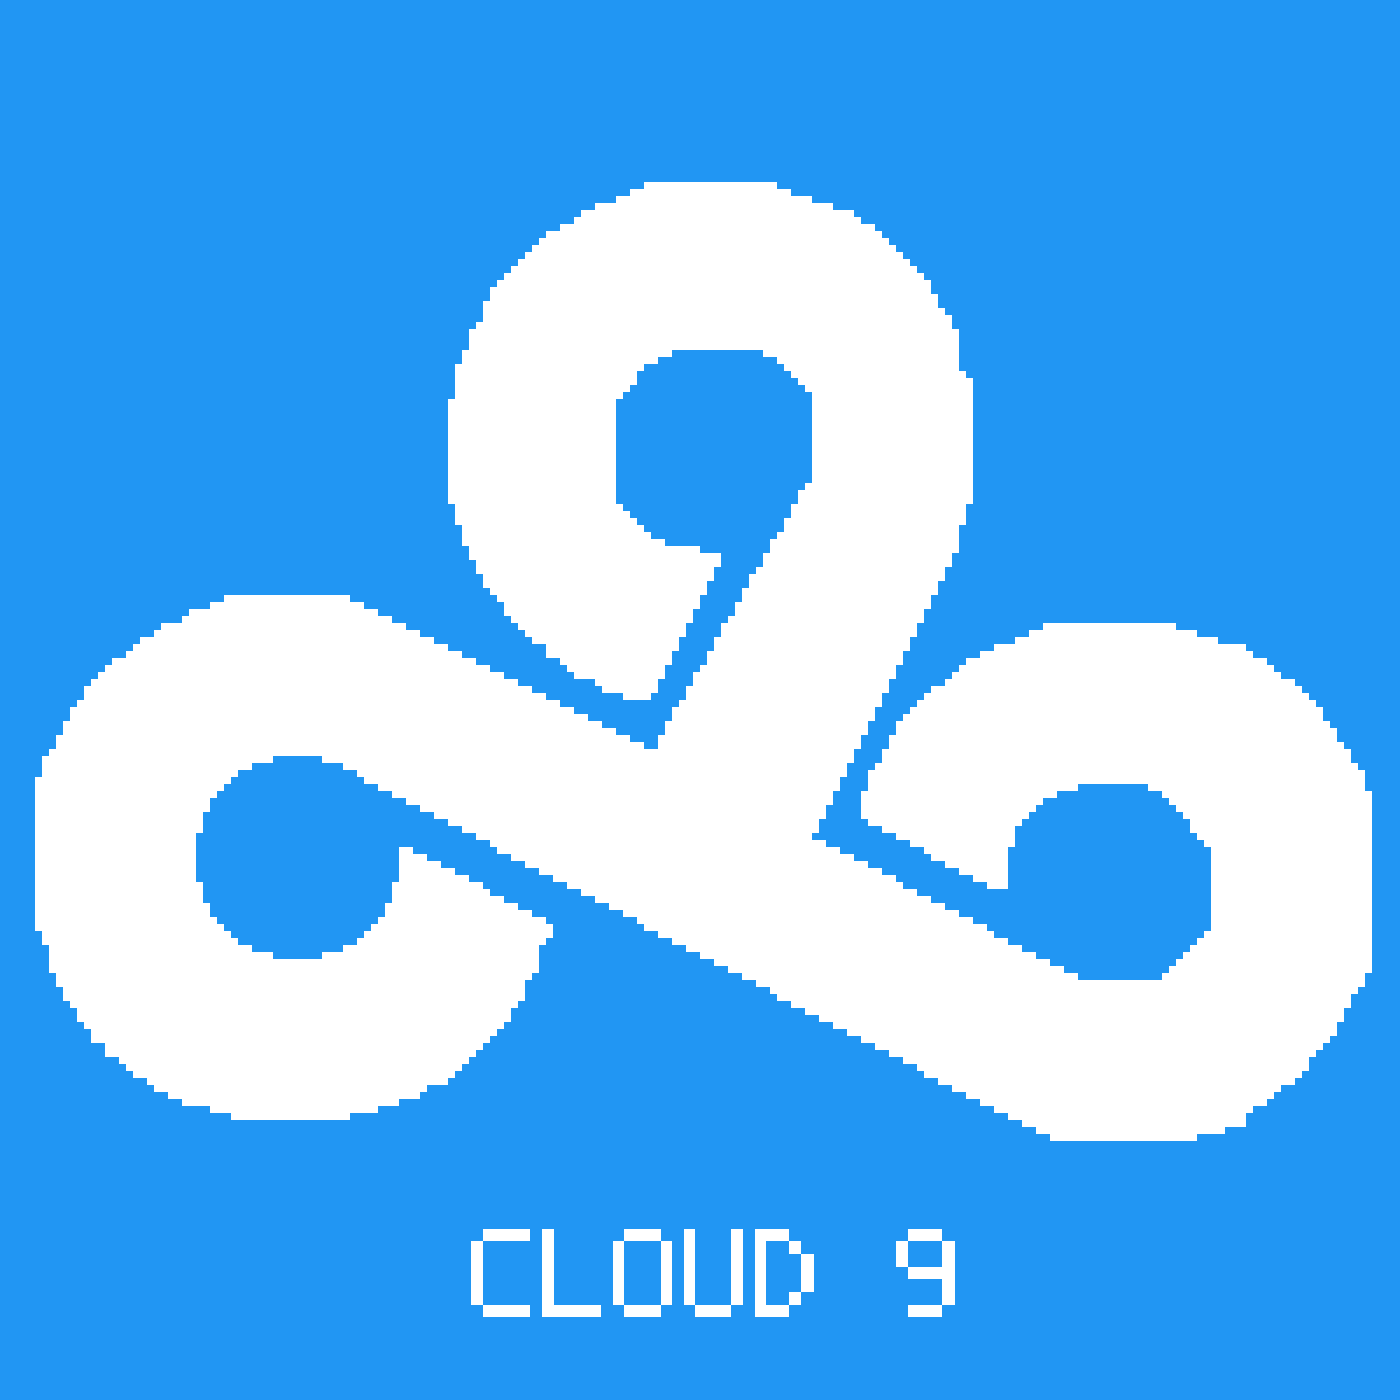 C9 Logo - Since a few people asked for the C9 Logo in Pixel art. Here's for ...